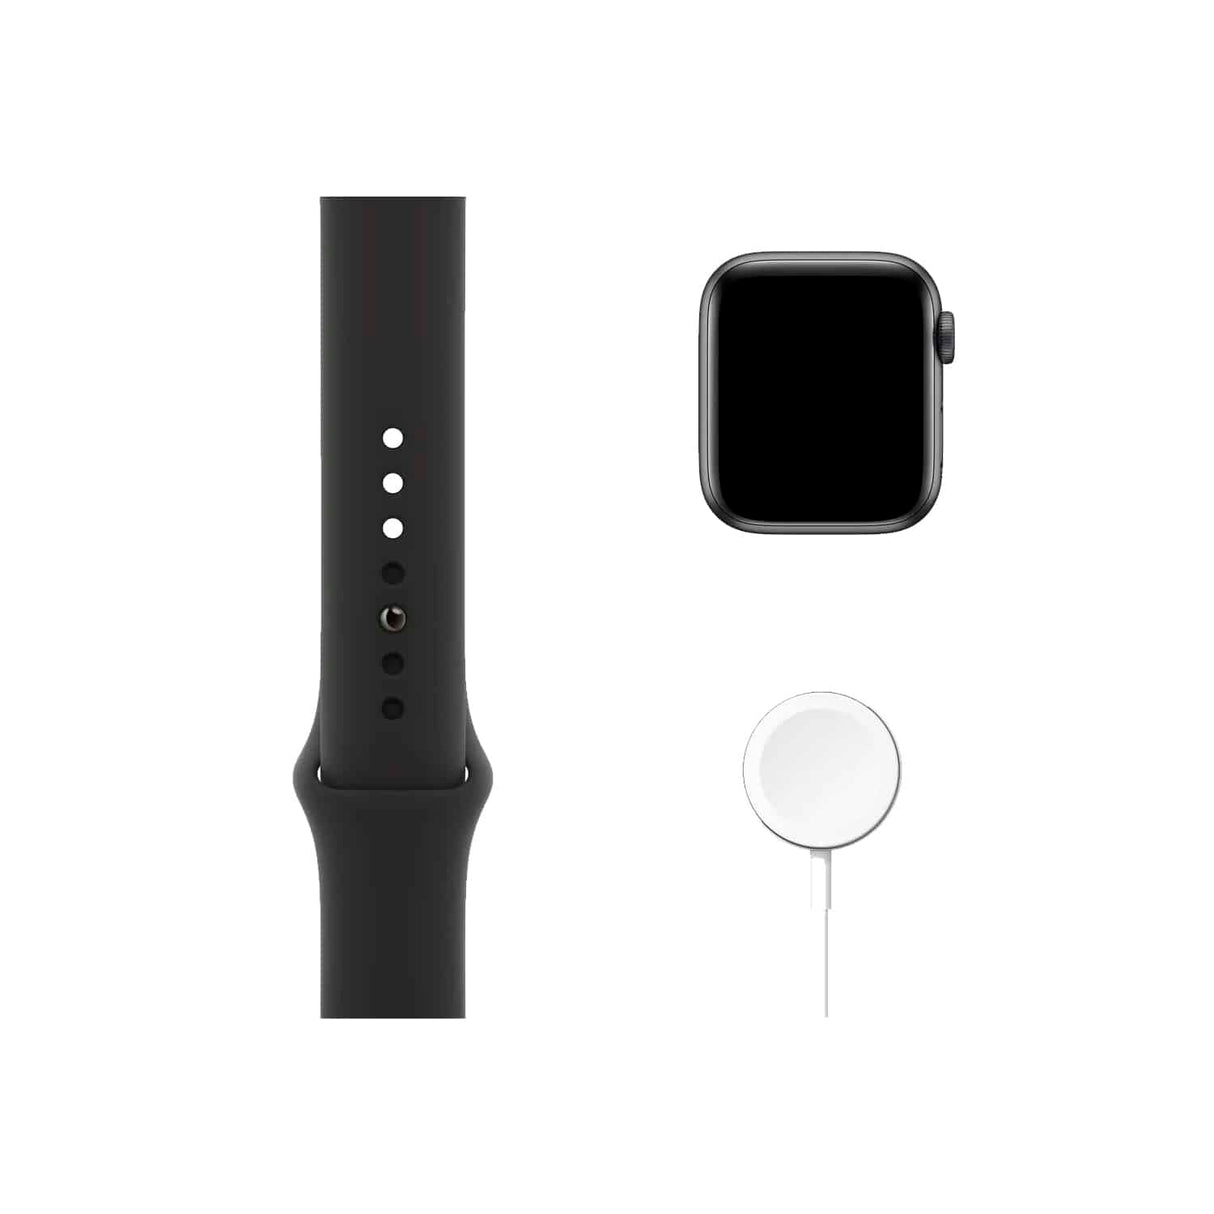 Apple Watch Serie 6 A2291 40MM Space Gray Aluminum Case